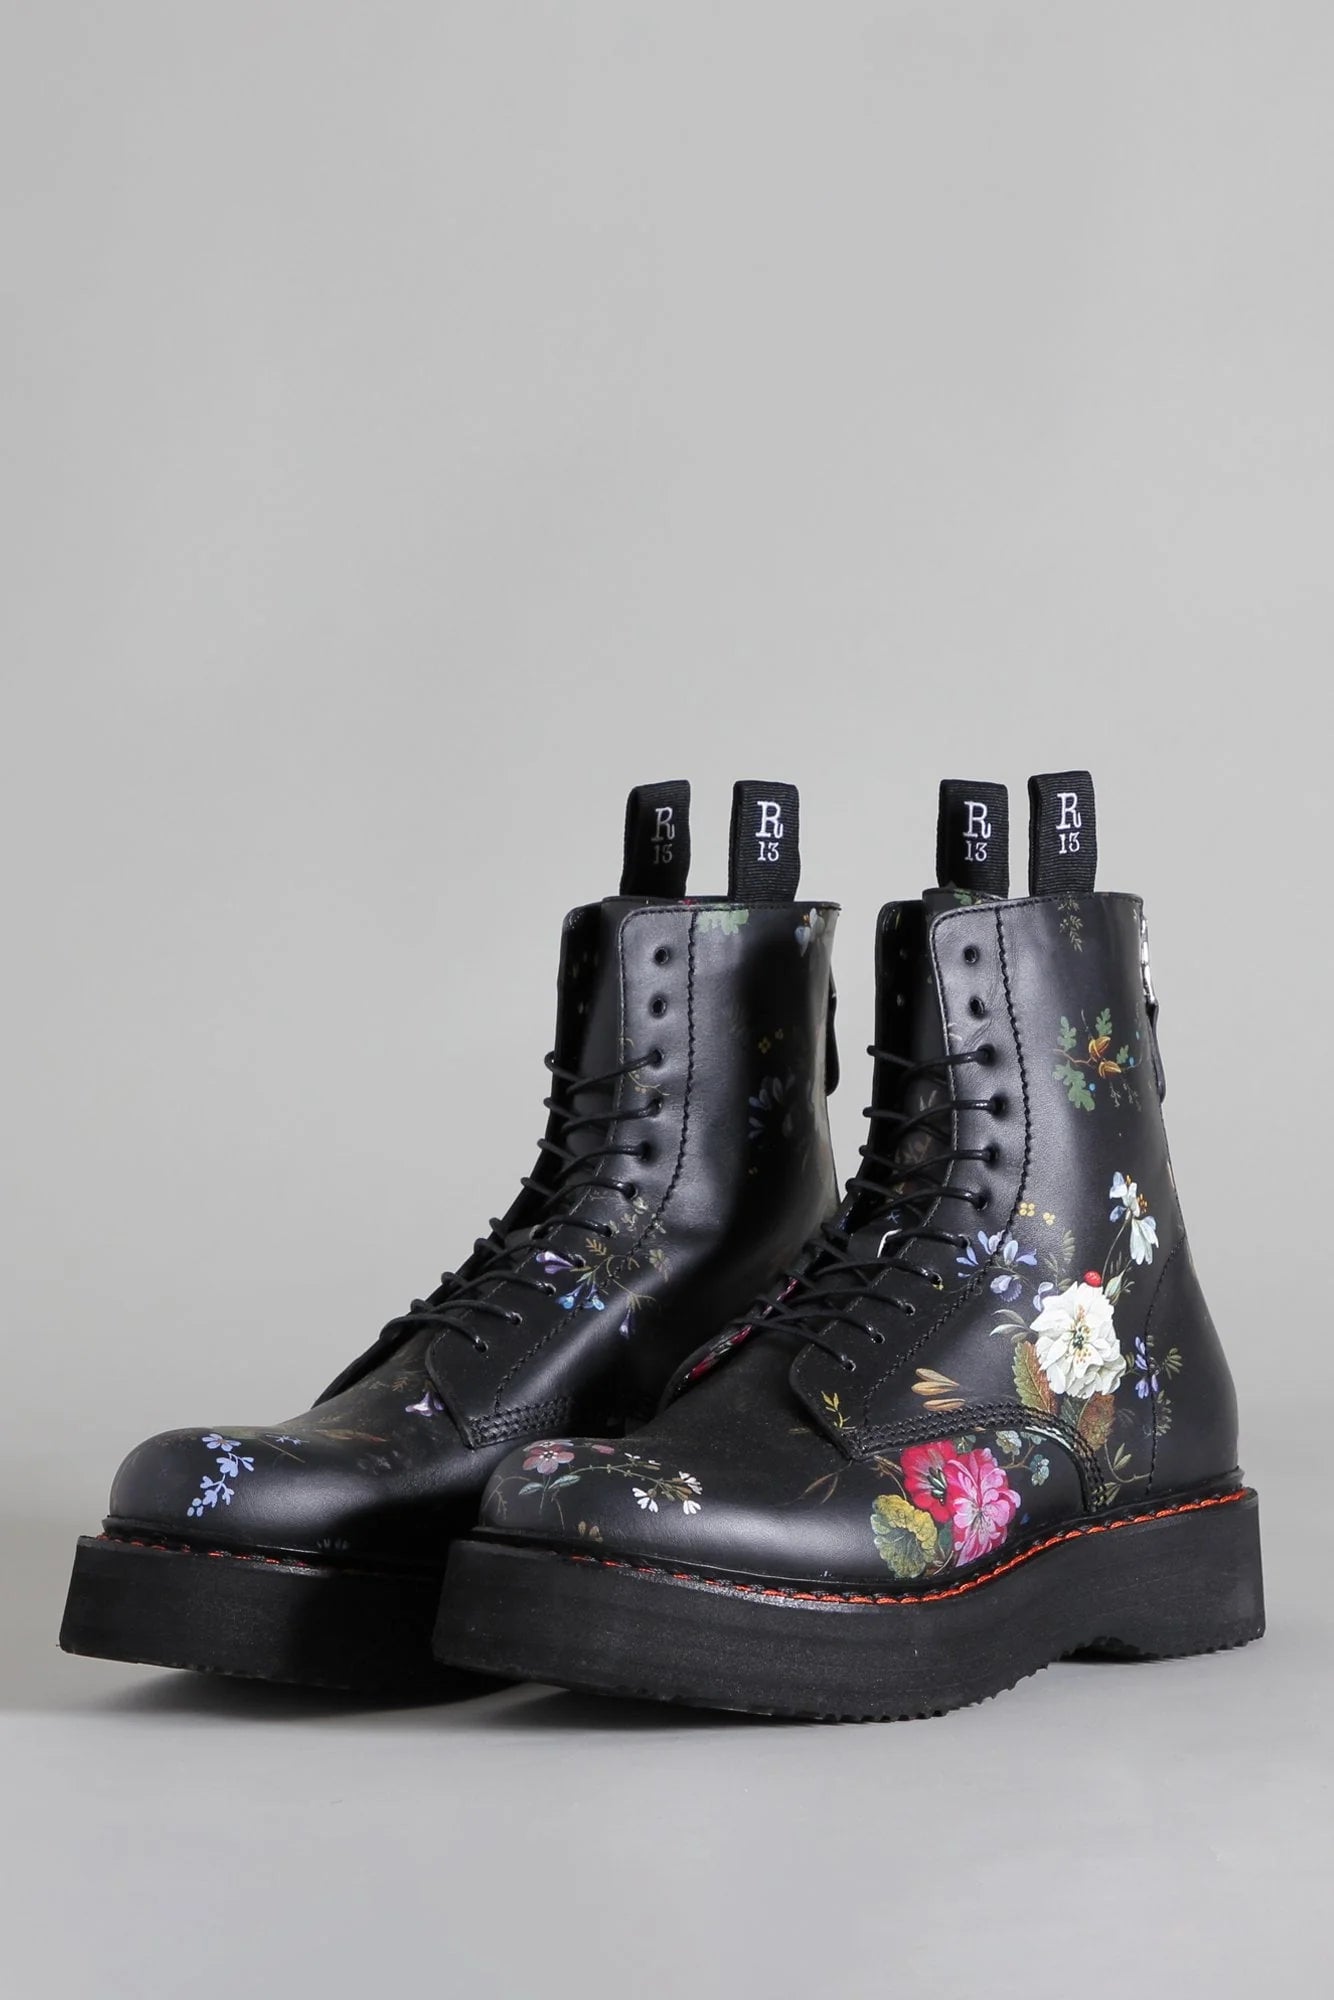 R13 Floral Stack Boot